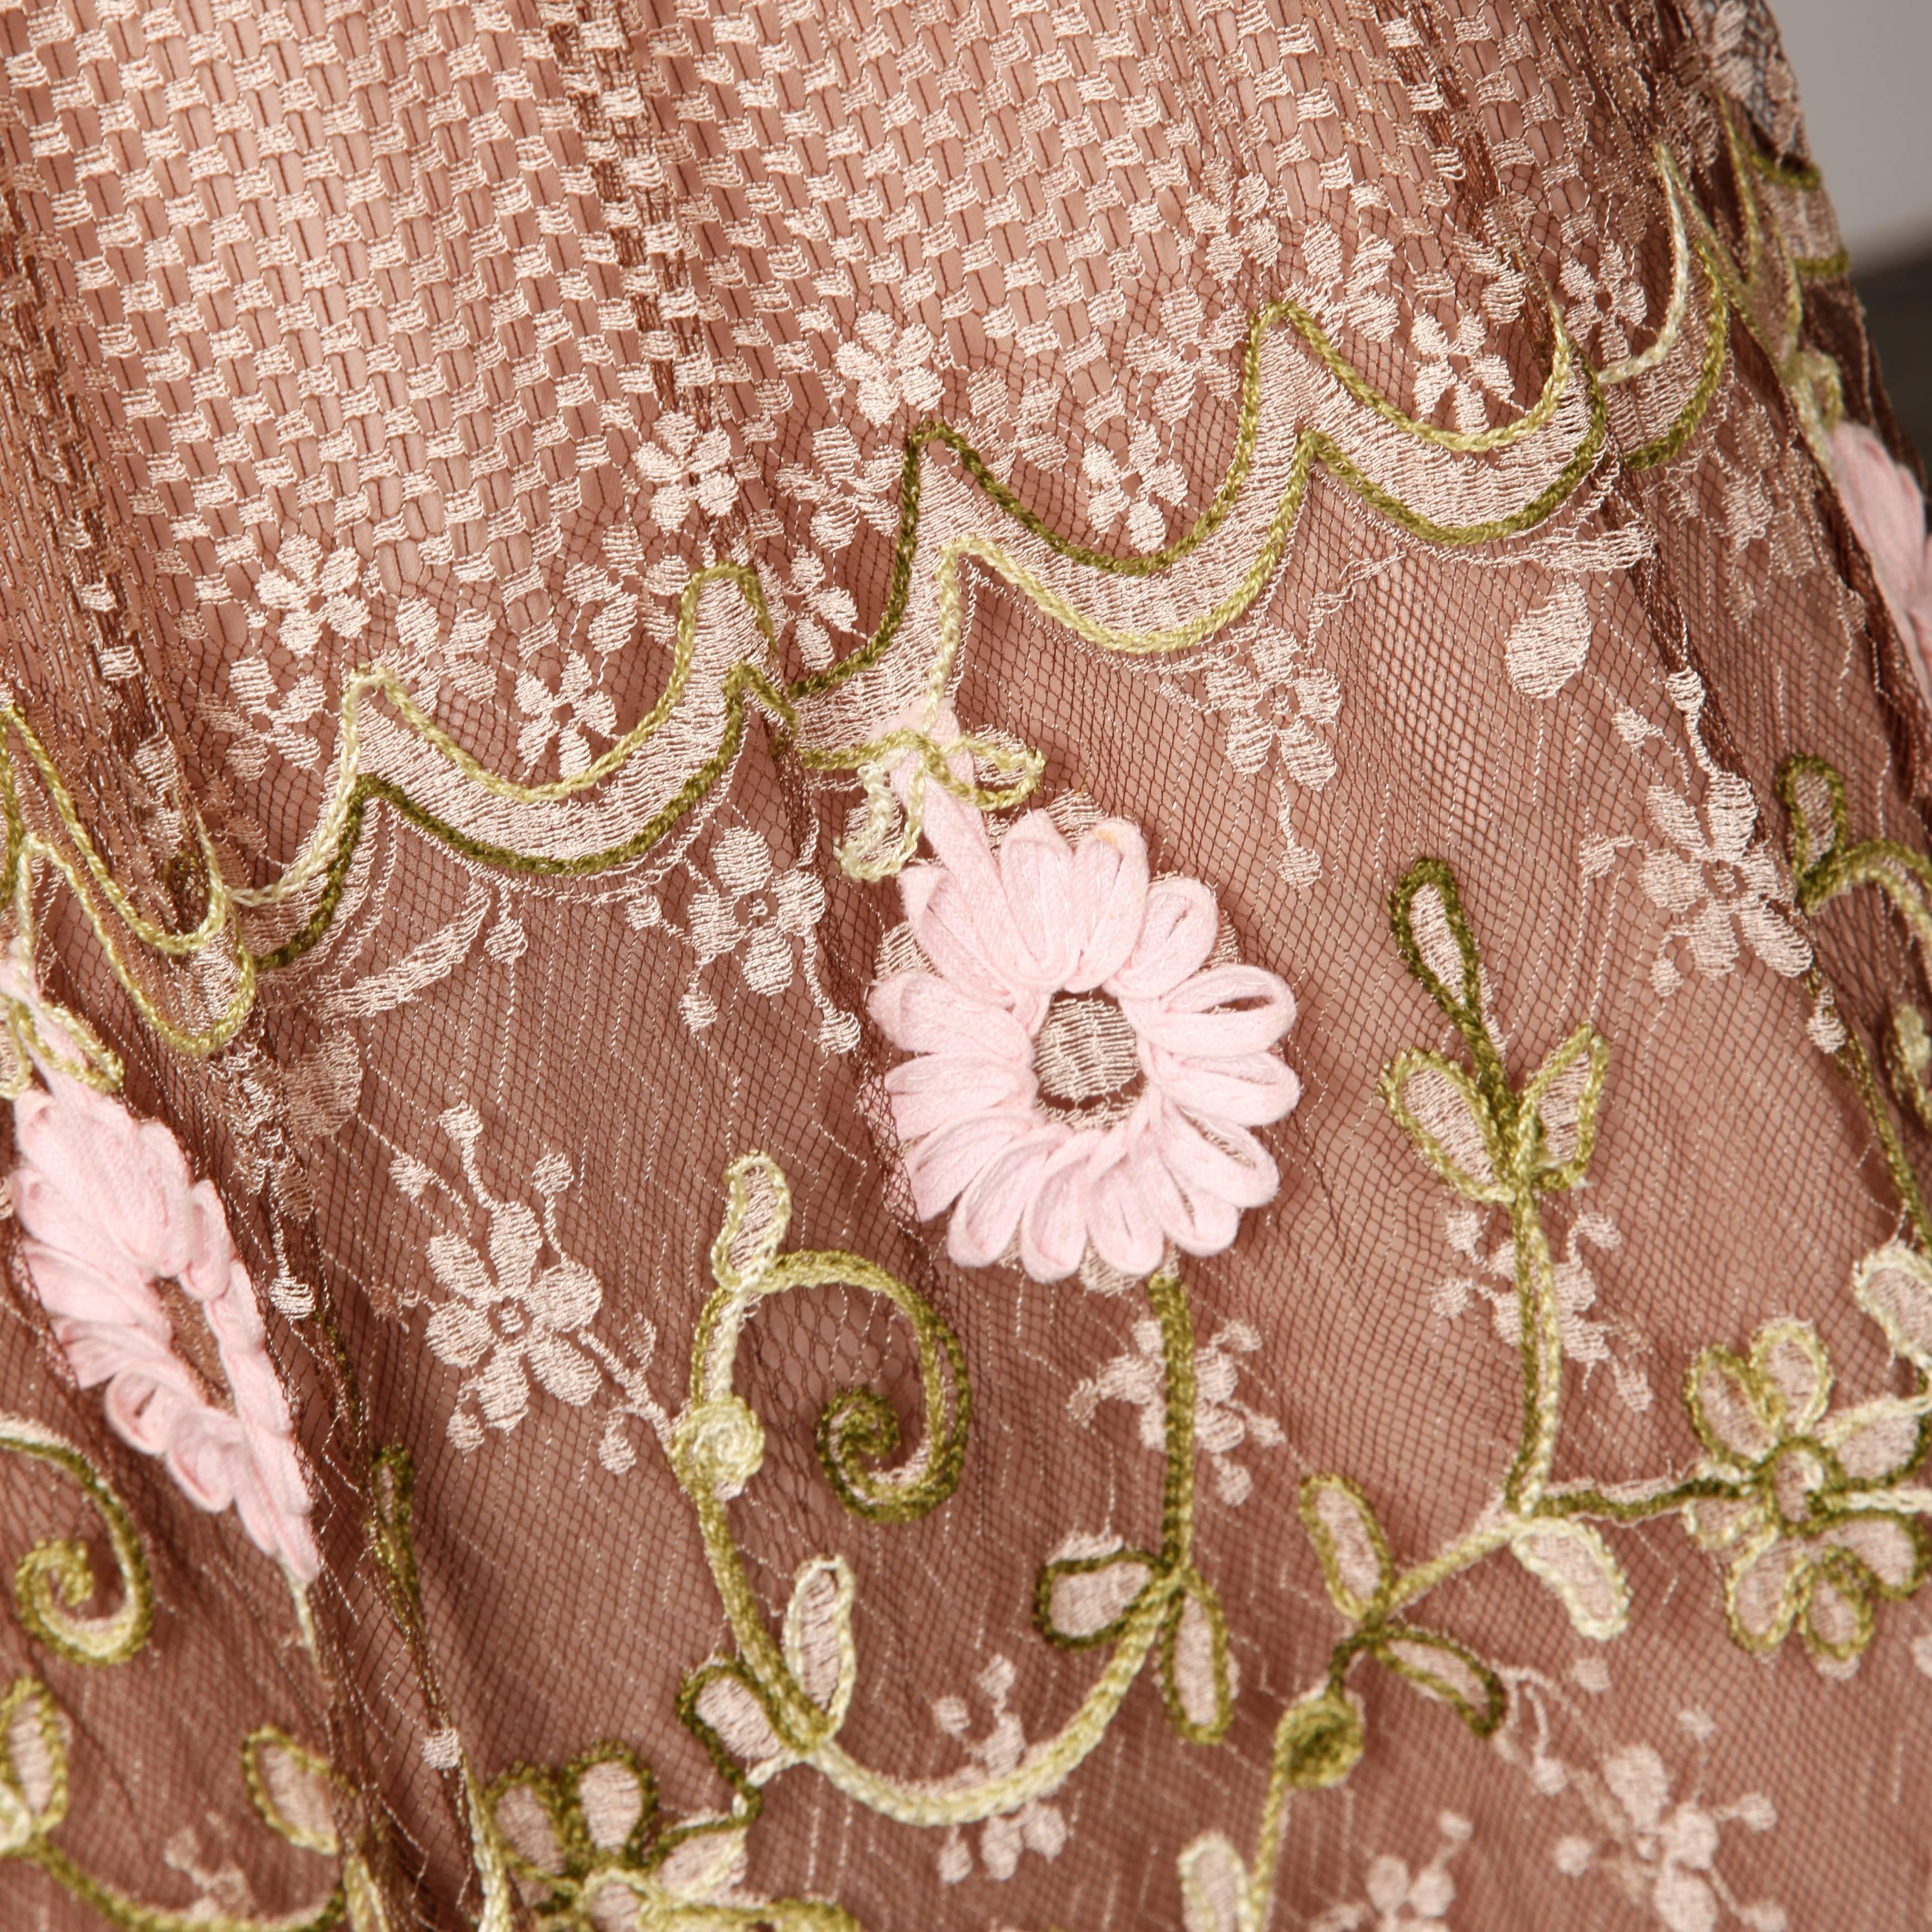 Capriccio Vintage Taupe Embroidered Flower Lace Dress with Scalloped Hem In Excellent Condition For Sale In Sparks, NV